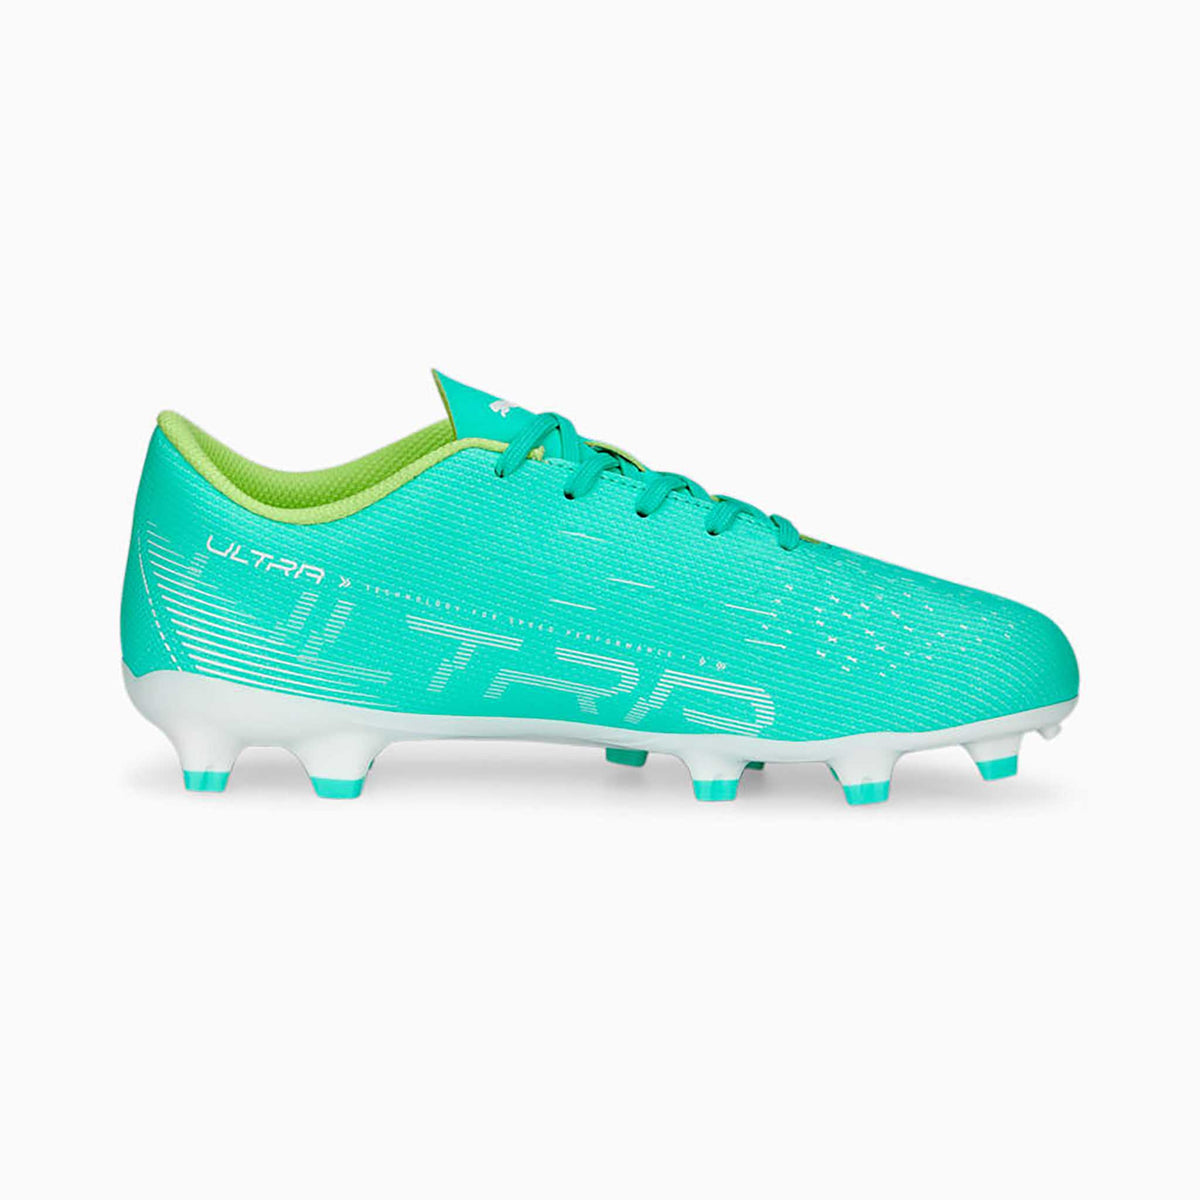 Puma Ultra Play FG/AG souliers soccer crampons enfant lateral- electric peppermint